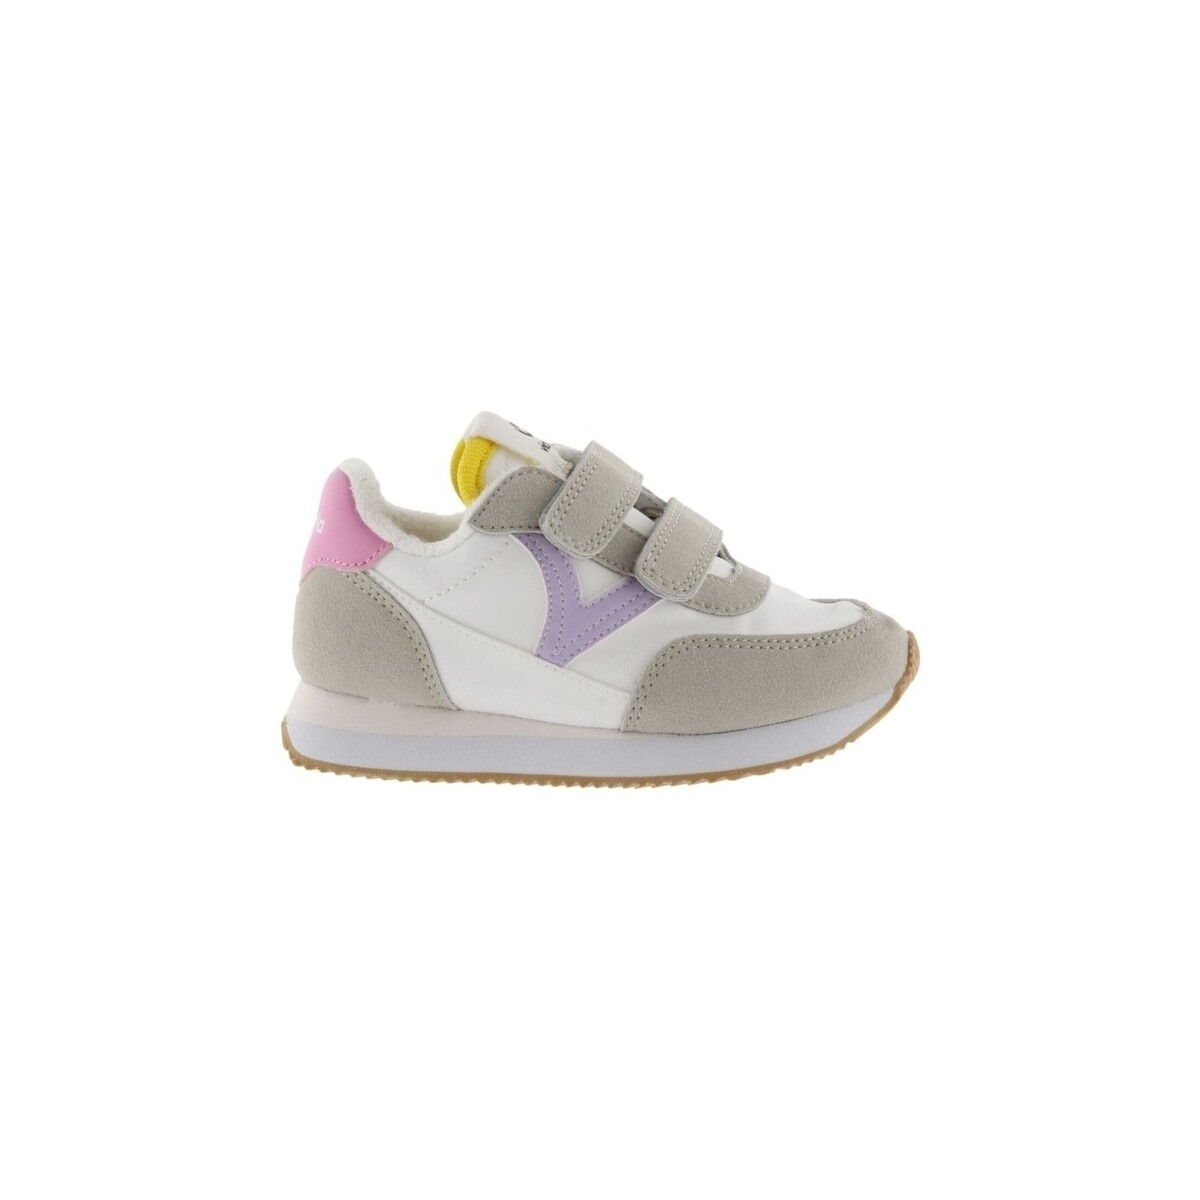 Sneakers Victoria Baby 137100 – Lila